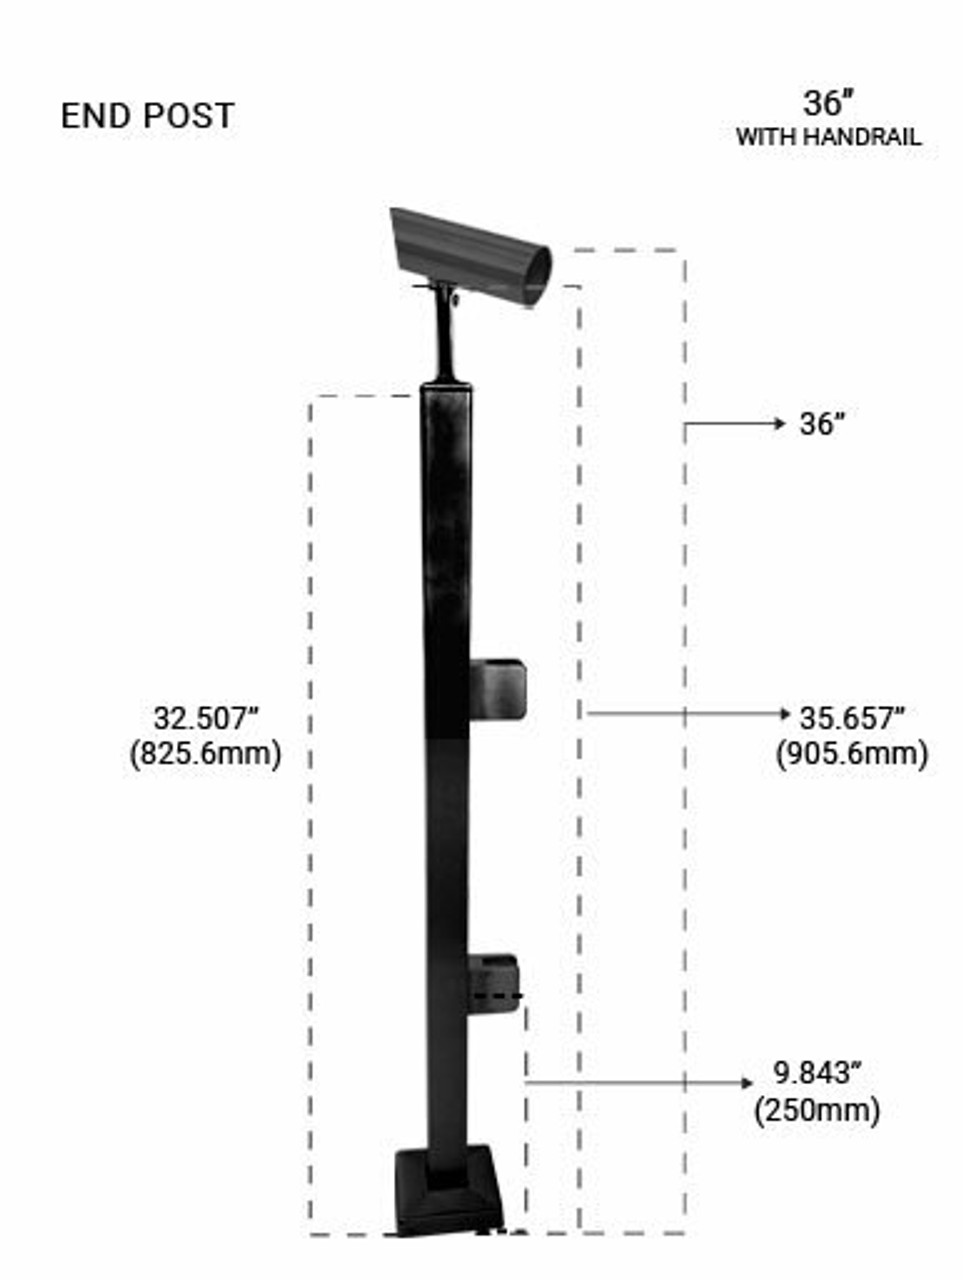 PS40524036EBL POST SQUARE END 36" SS316 in Black Finish